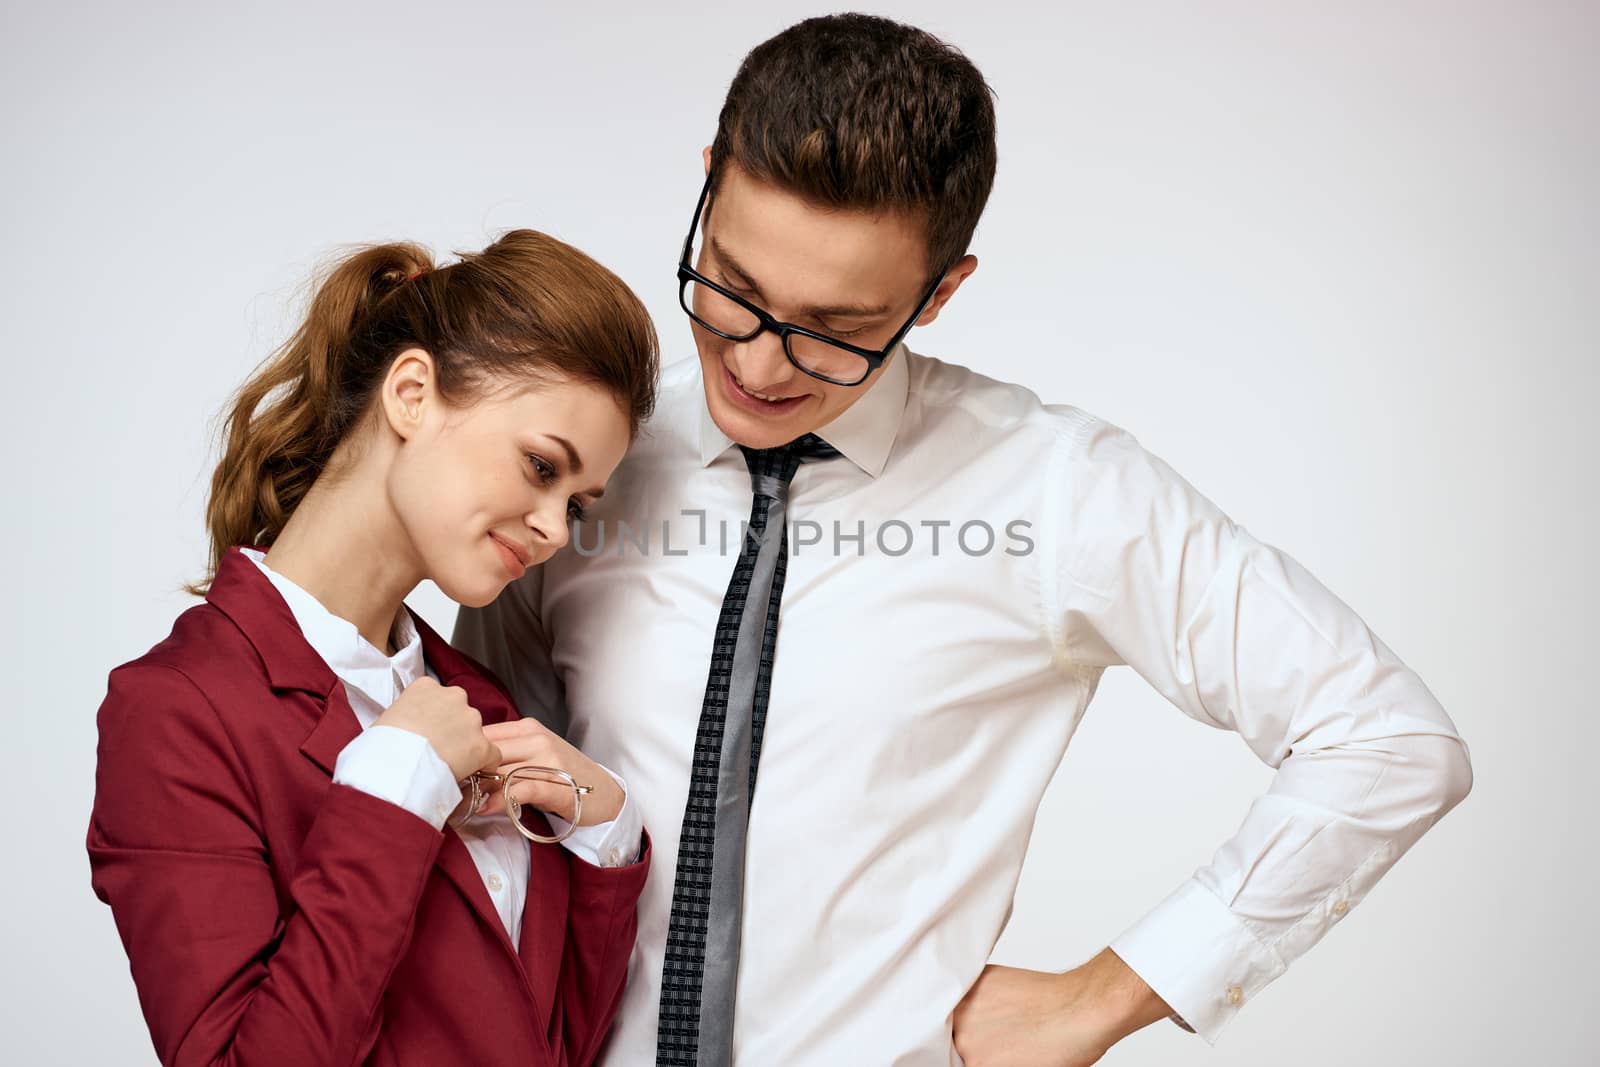 Business men and women work colleagues office team light background. High quality photo